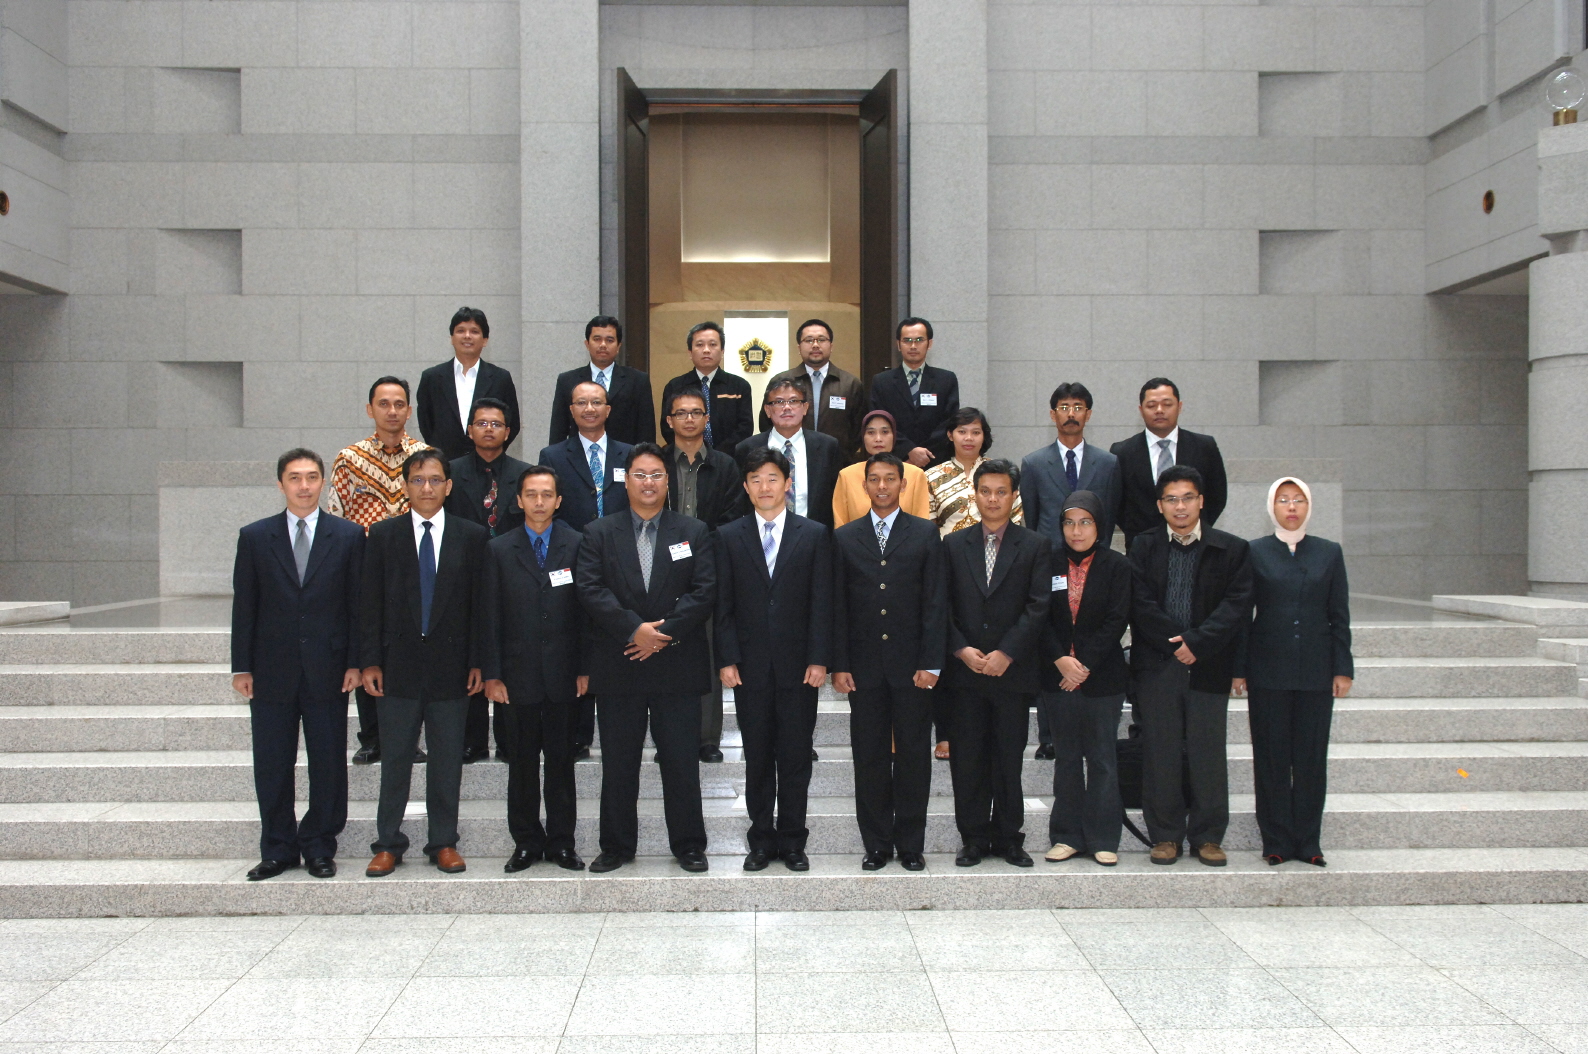 [04_25_08]Delegation from the Public Prosecution Office and KPK visits the Supreme Court